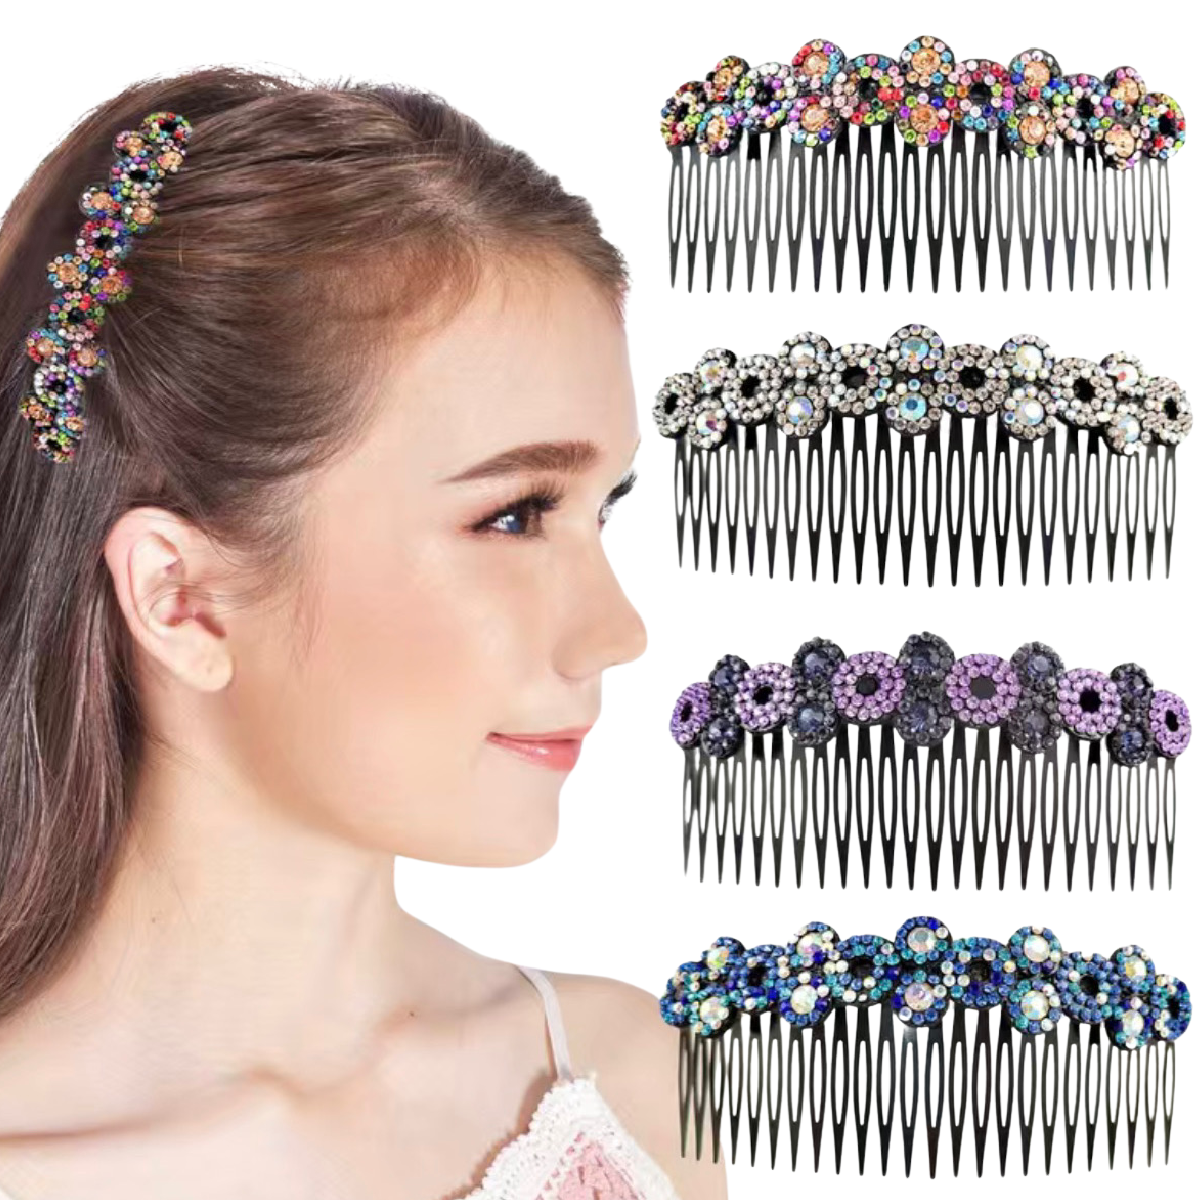 Primary image for Large 5" Hair Comb Rhinestone Flowers Barrette Elegant Sparkling Accessory NEW